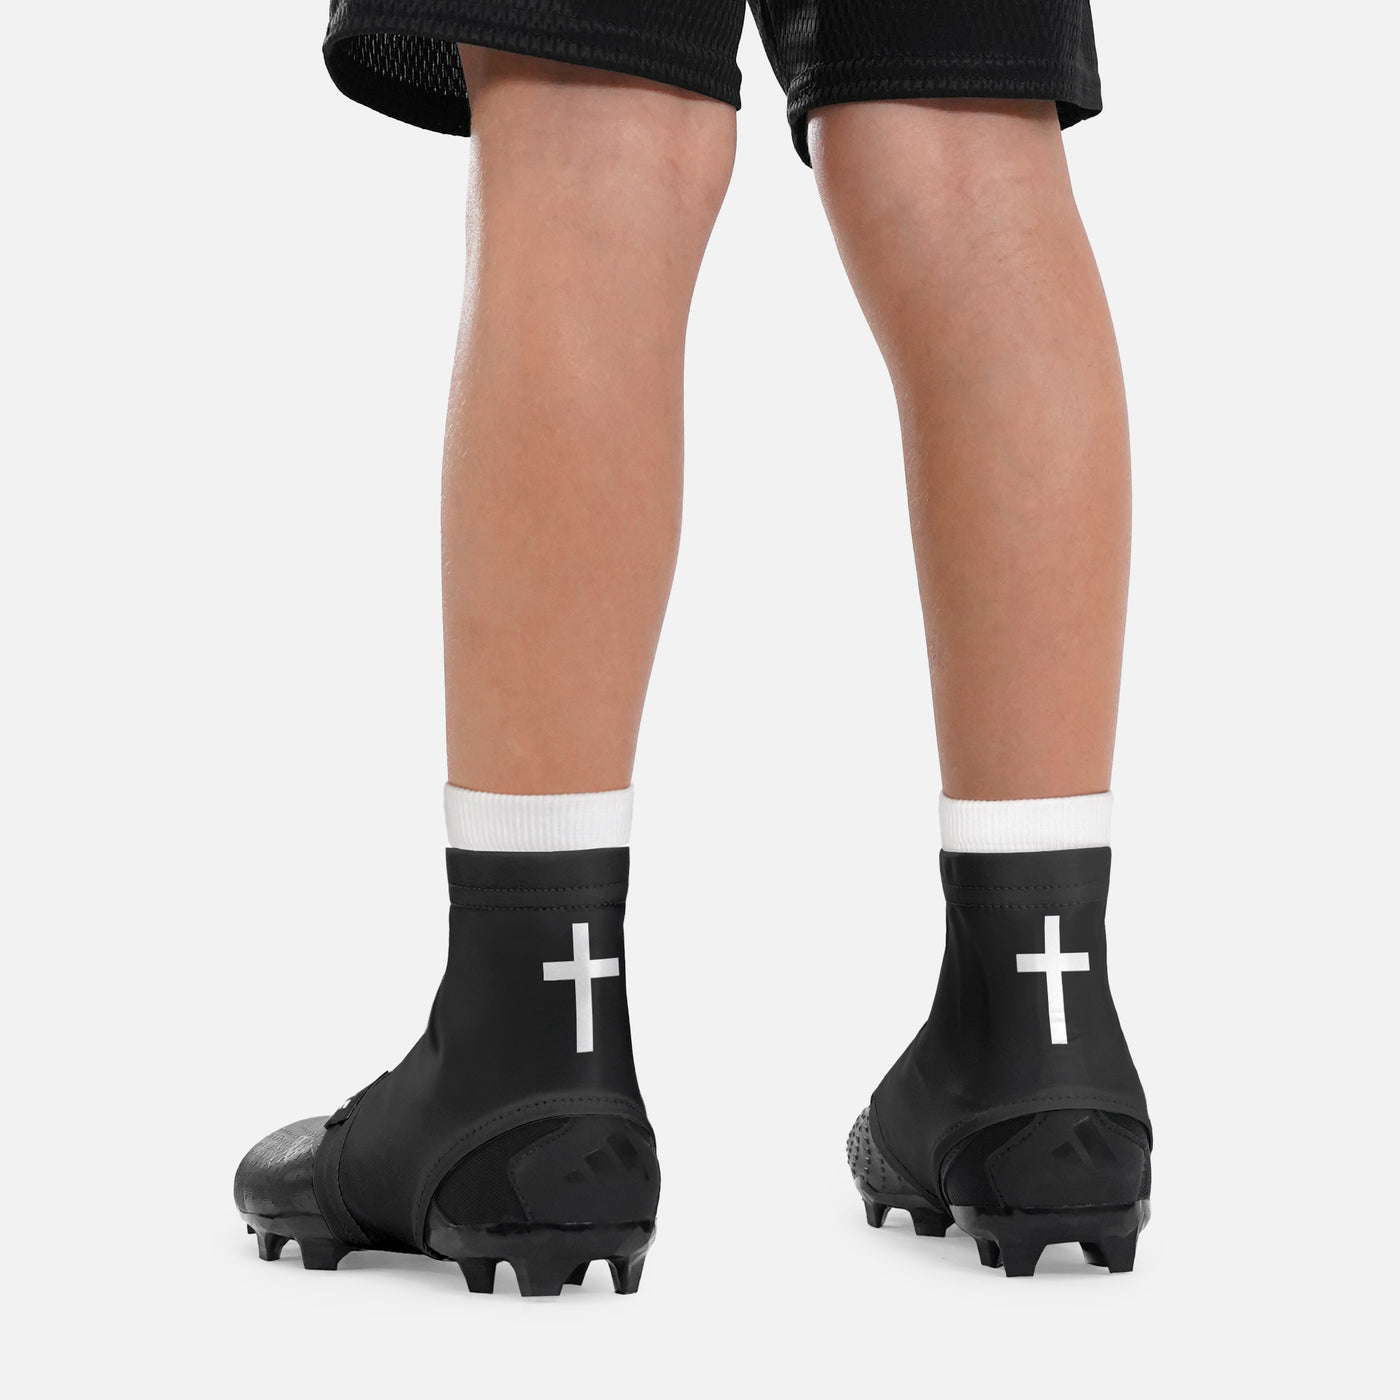 Faith Cross Black Kids Spats / Cleat Covers